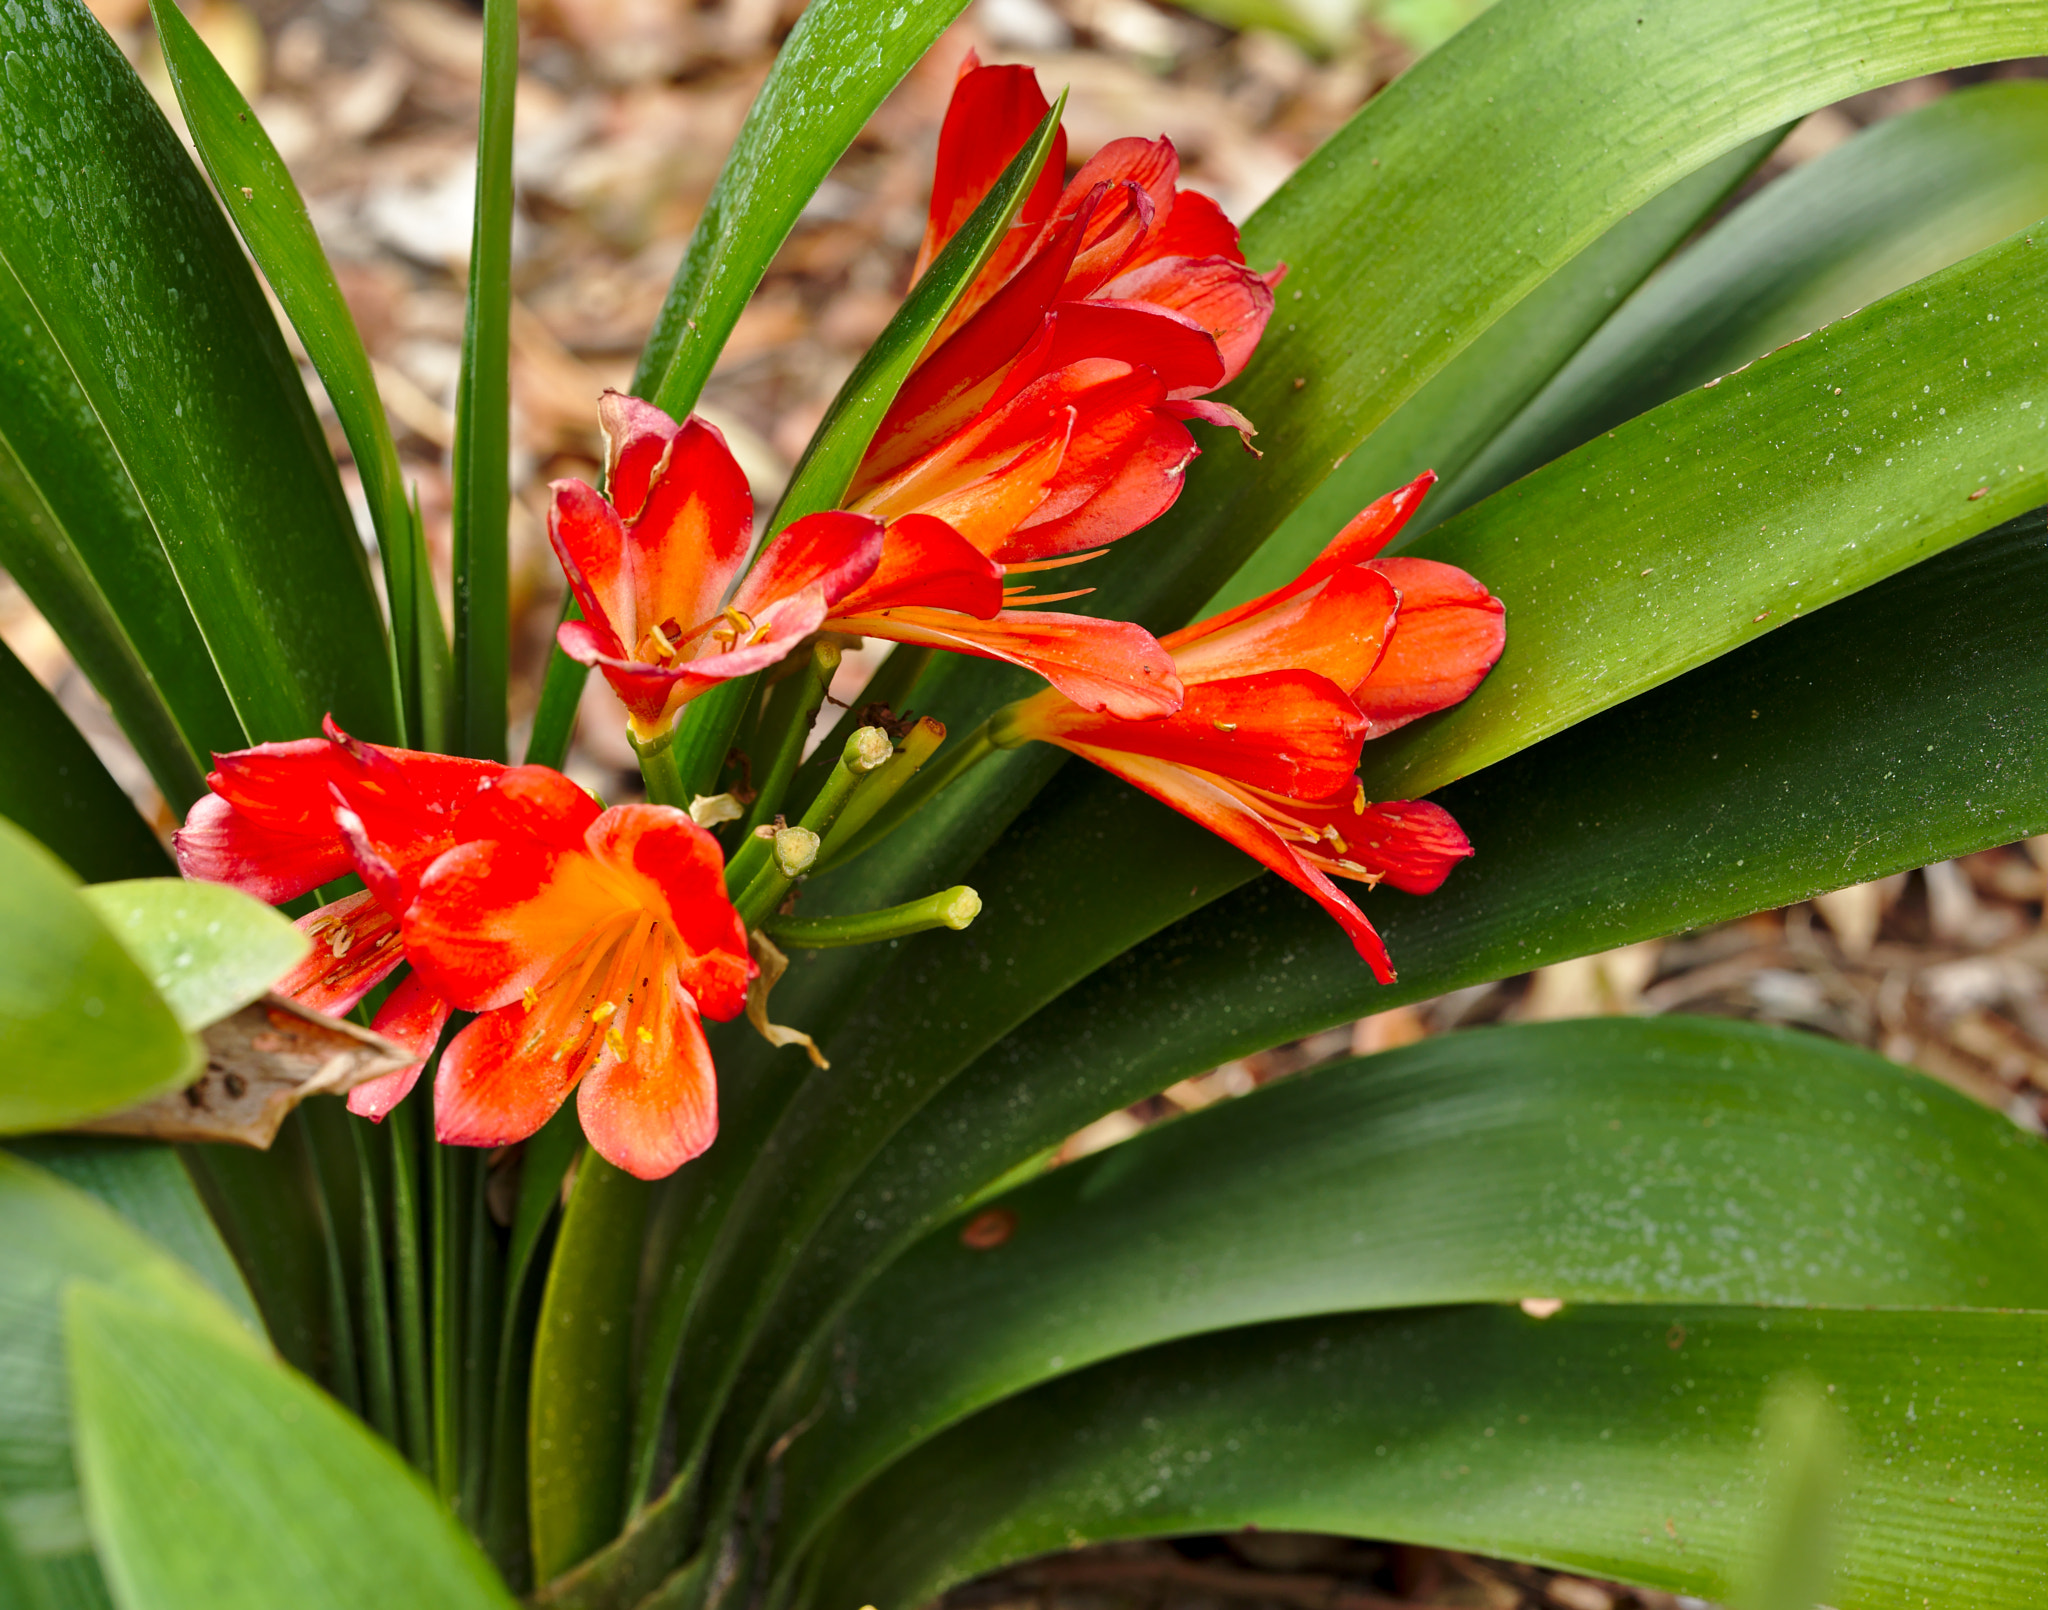 ZEISS Otus 85mm F1.4 sample photo. South african bush lilly or clivia miniata photography